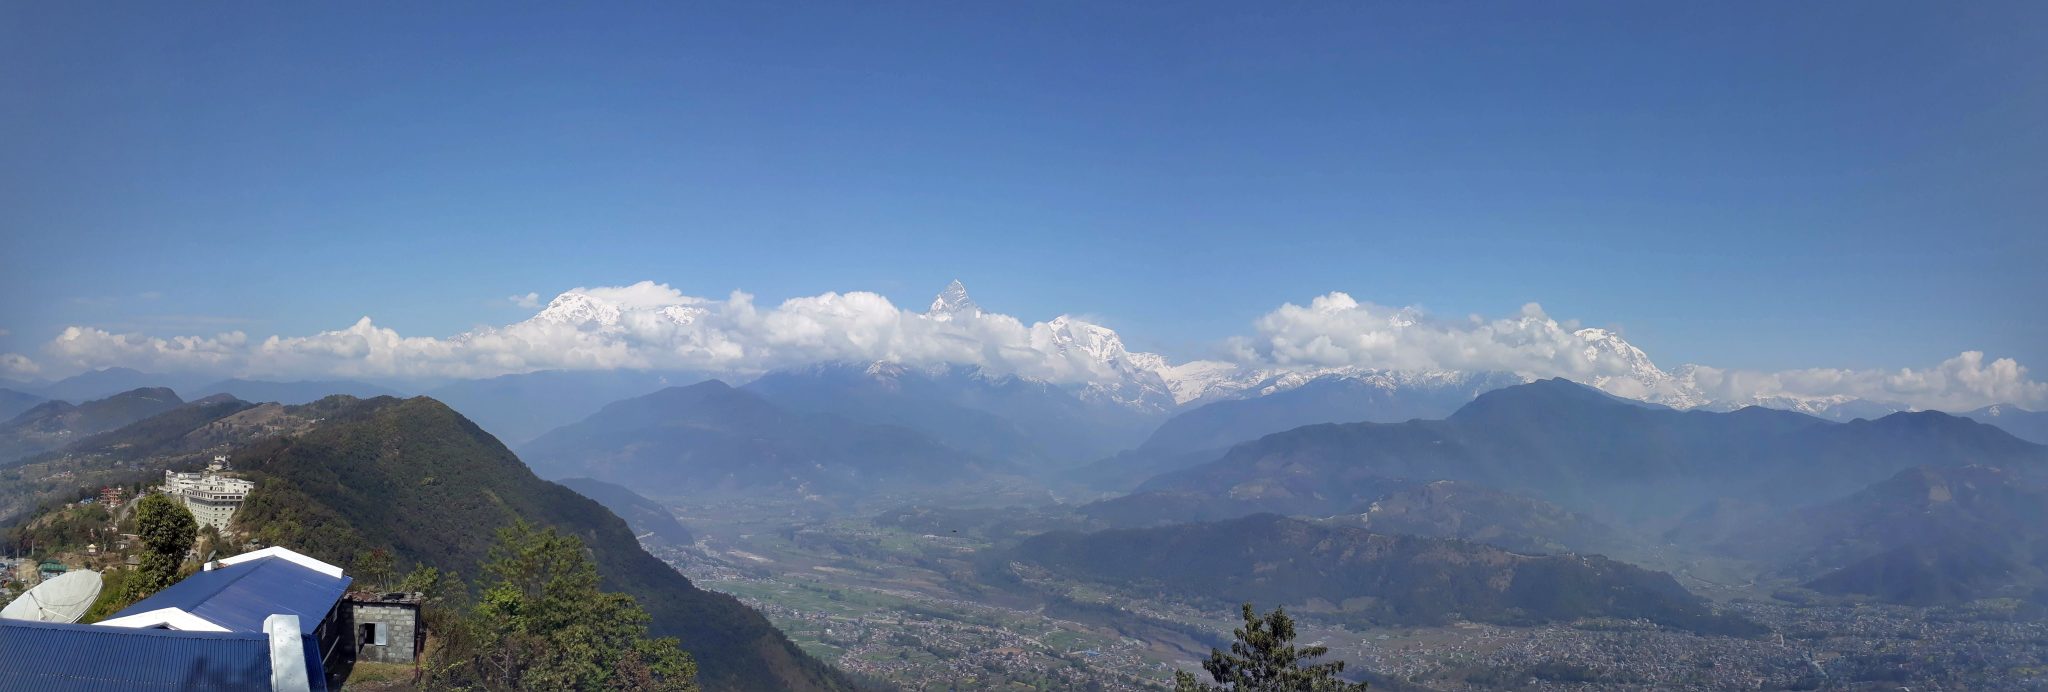 A mountain with blue sky and clouds in Pokhara